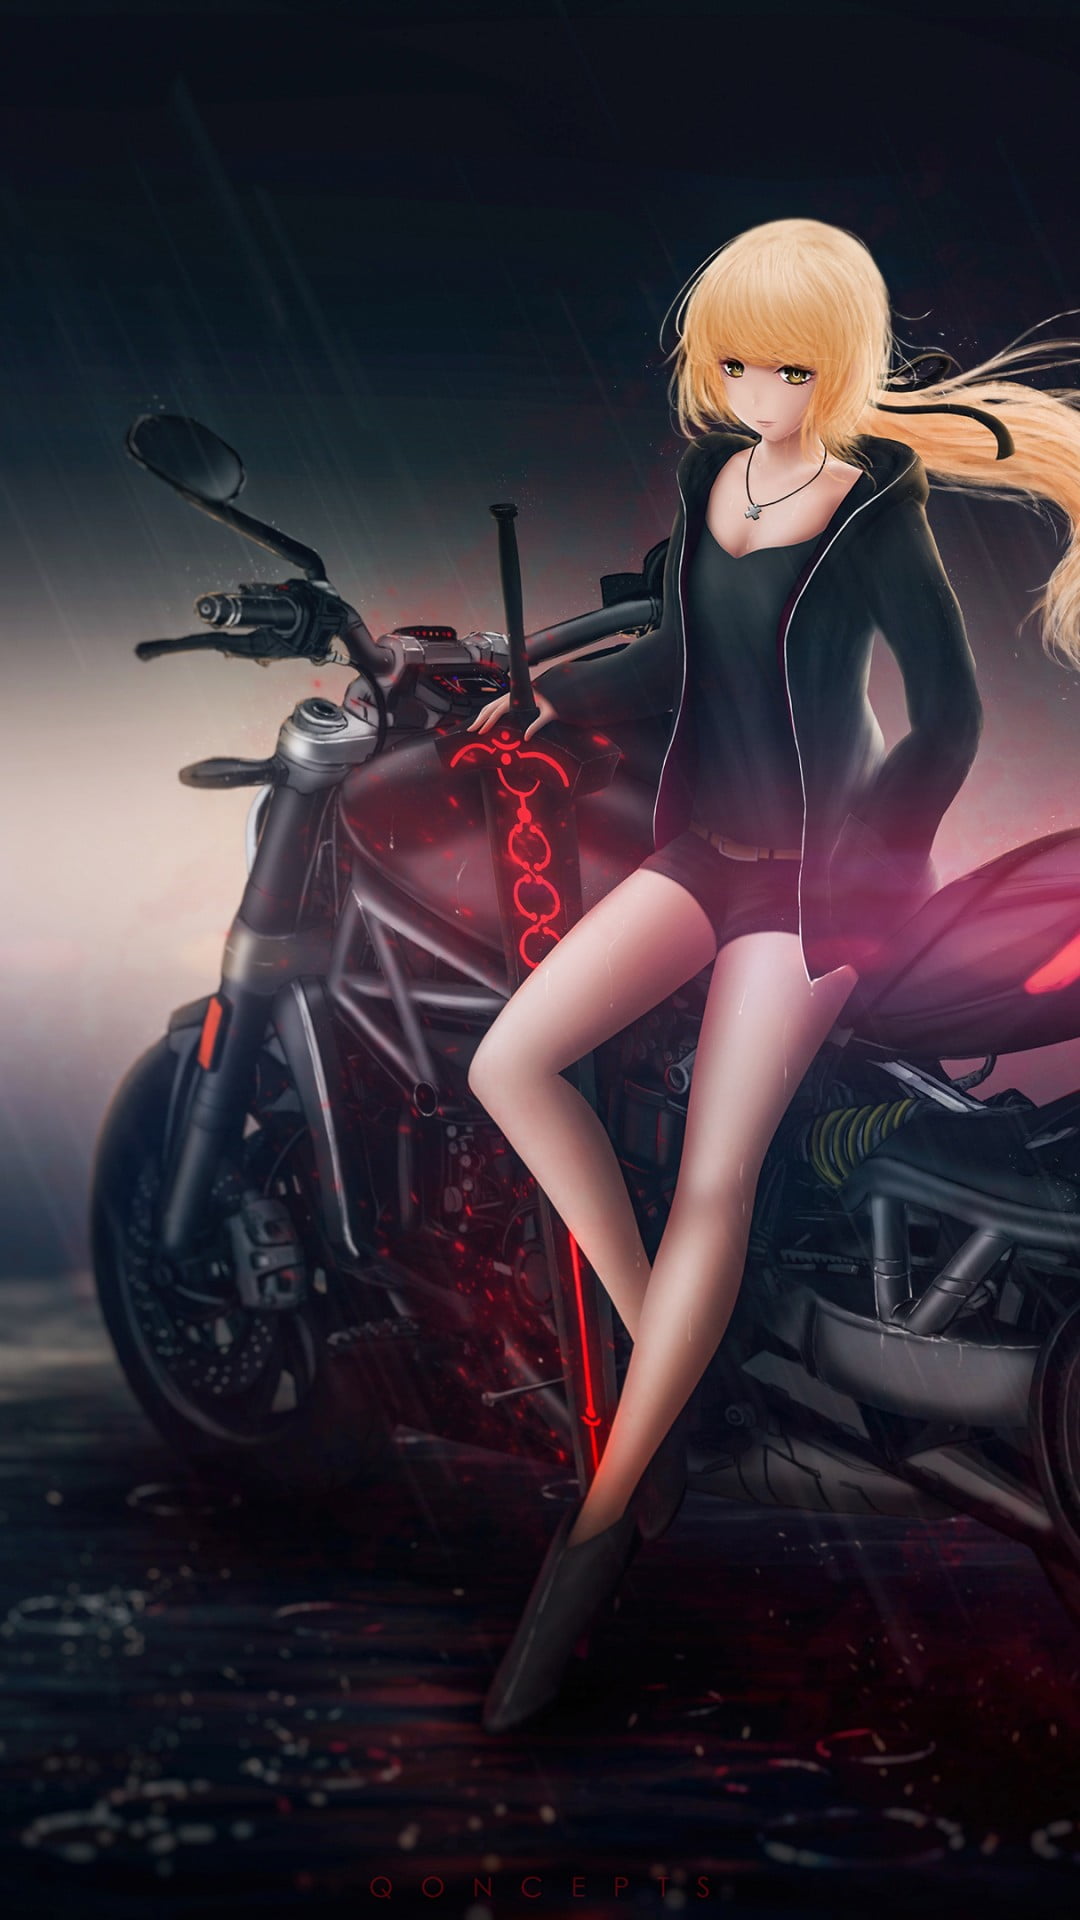 Girls And Motorcycles Iphone Wallpapers